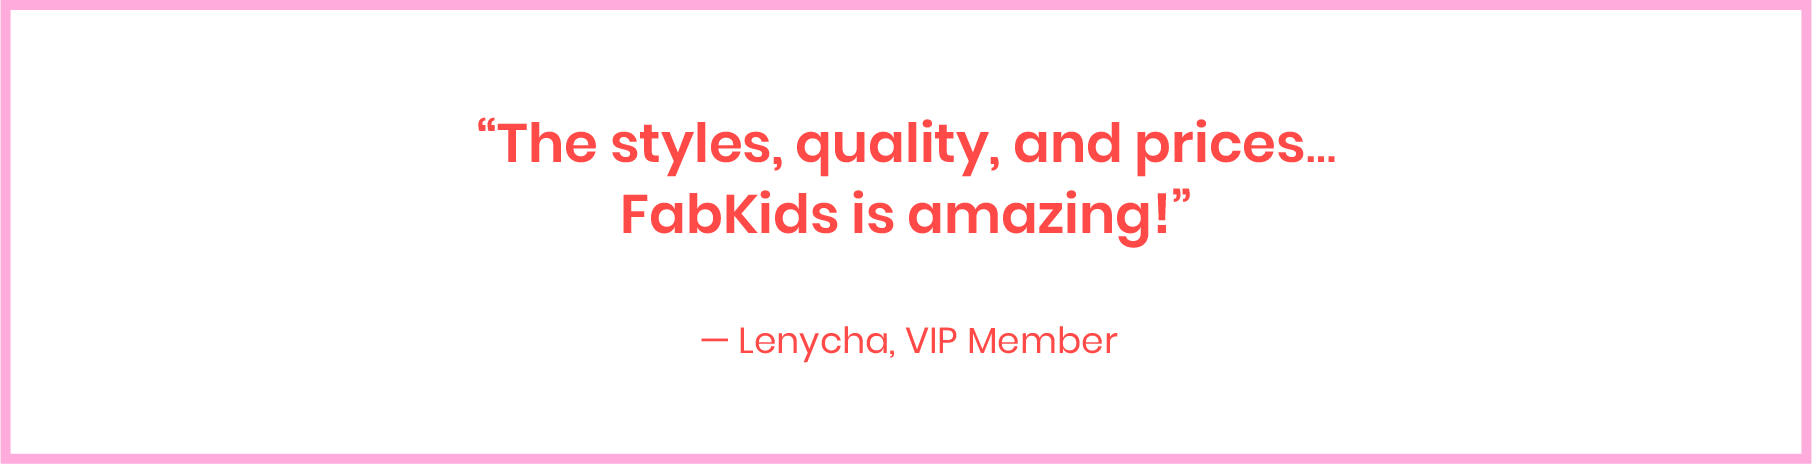 The styles, quality, and prices... FabKids is amazing! - Lenycha, VIP Member